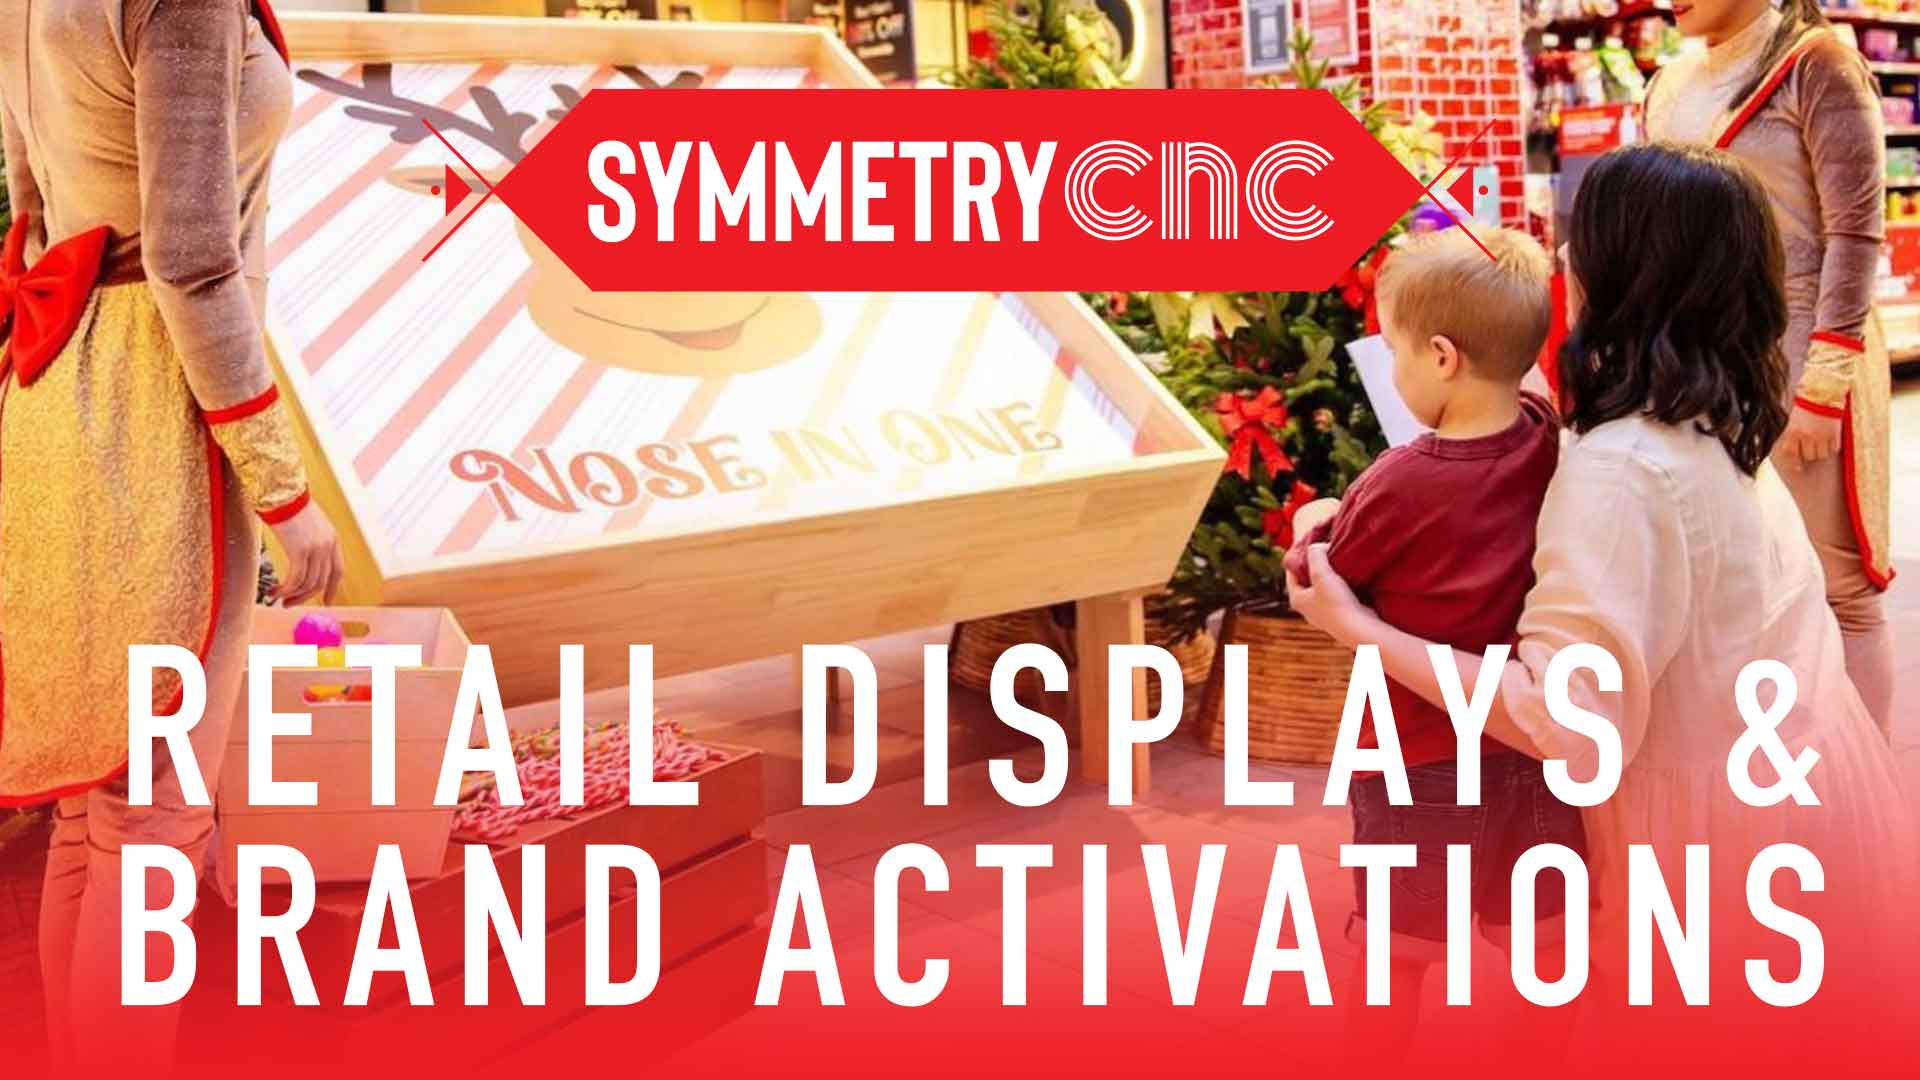 Retail-Displays-and-Brand-Activations-in-Sydney-Symmetry-CNC